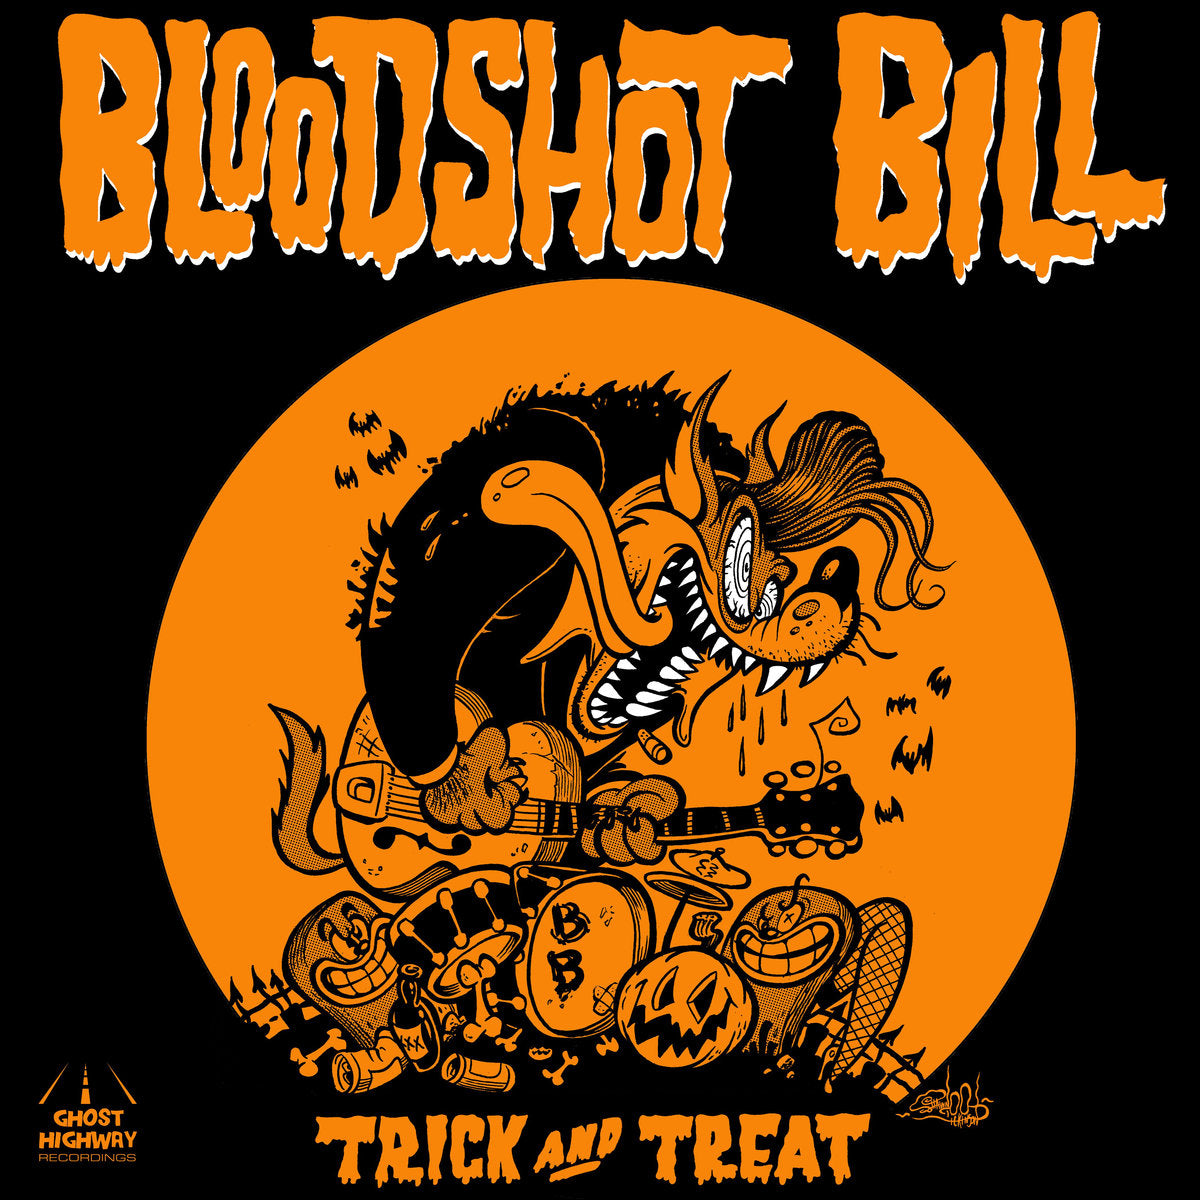 Bloodshot Bill- Trick And Treat 7” ~GHOST HIGHWAY RECORDINGS!